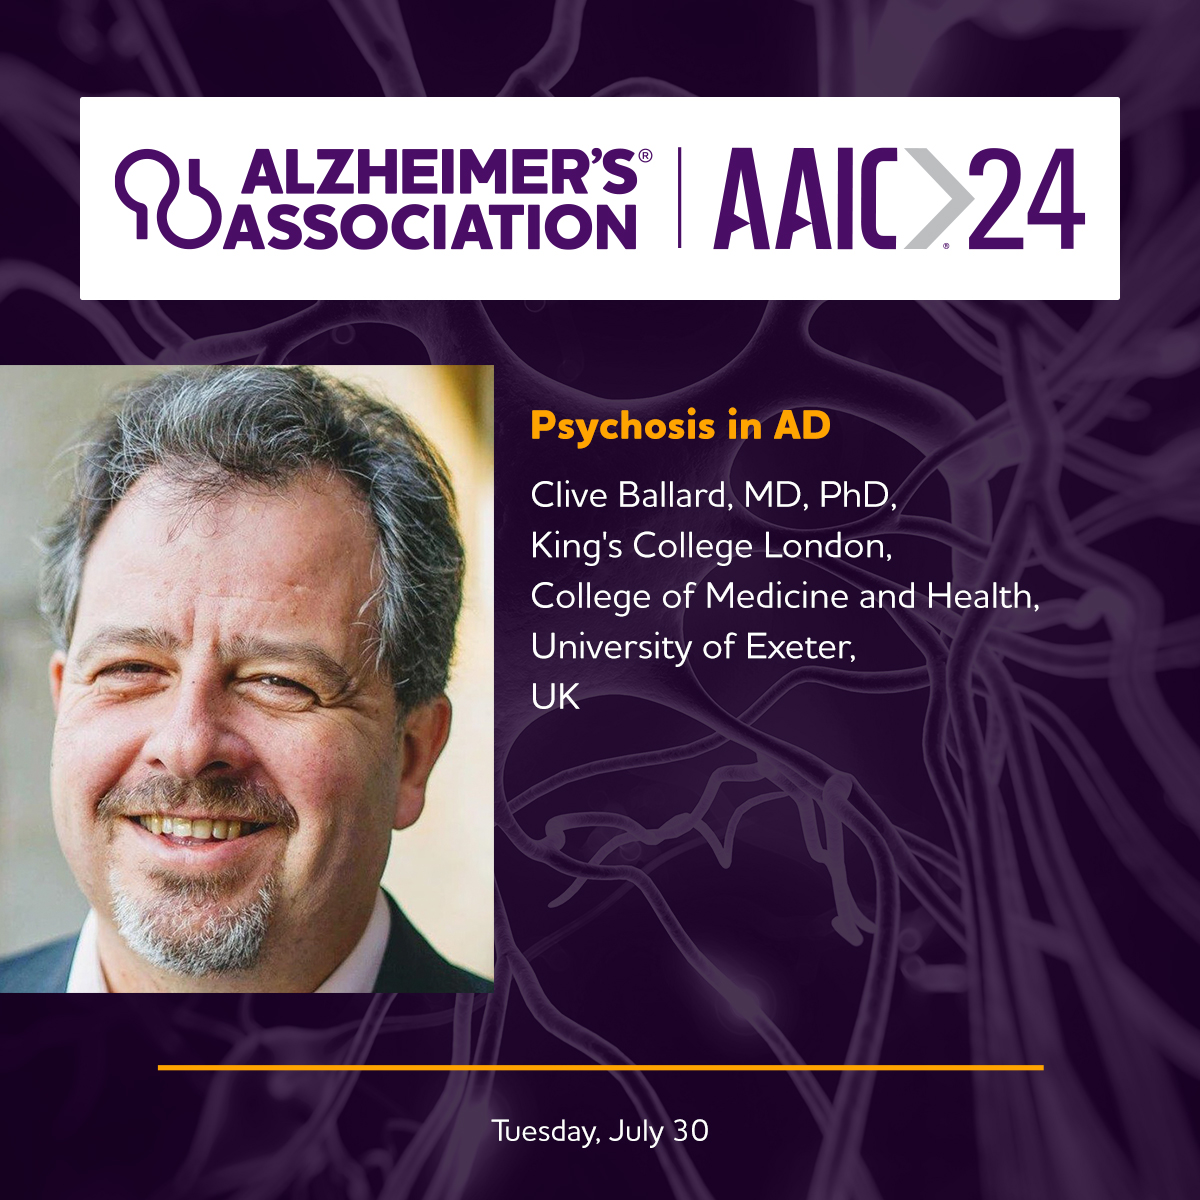 Join @Clive_Ballard (@KingsCollegeLon, @UniofExeter) on Tuesday, July 30 at #AAIC24 in Philadelphia, USA and online for a presentation on Psychosis in Alzheimer’s disease. Register now and join the most influential meeting in dementia science: alz.org/aaic24